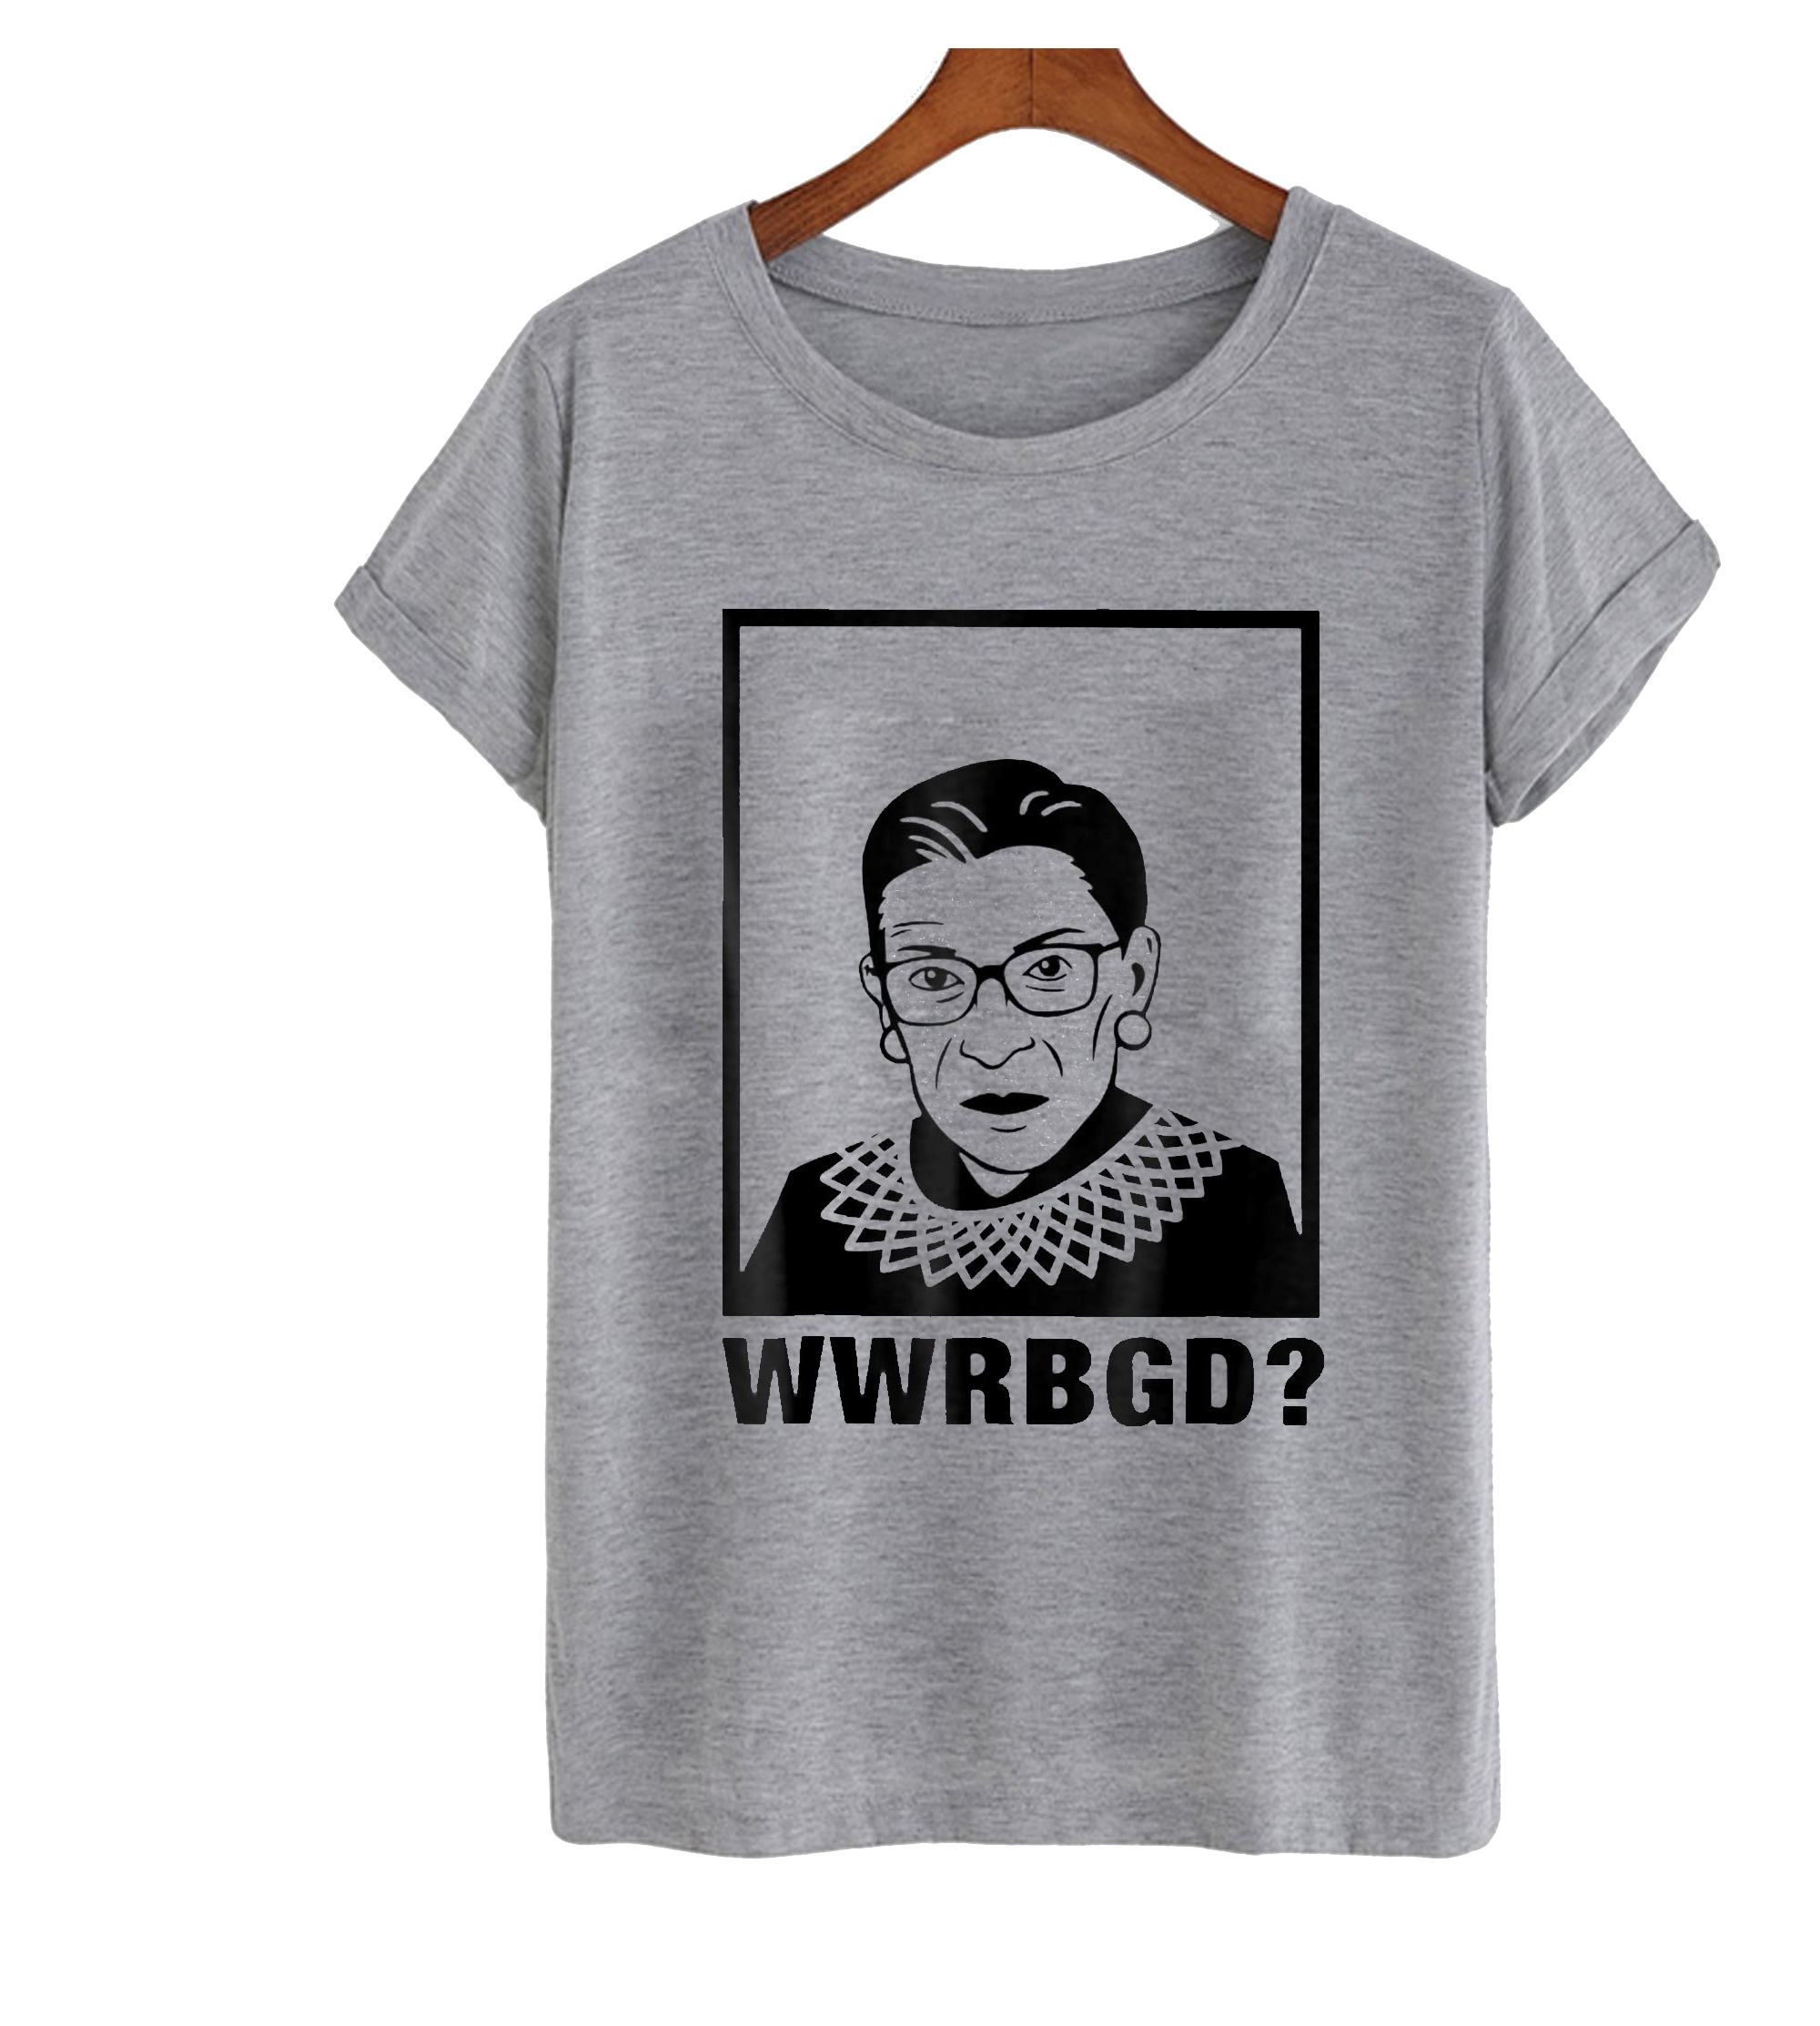 Wwrbgd T Shirt Off 77 Free Shipping - free t shirt roblox 2019 off 77 free shipping